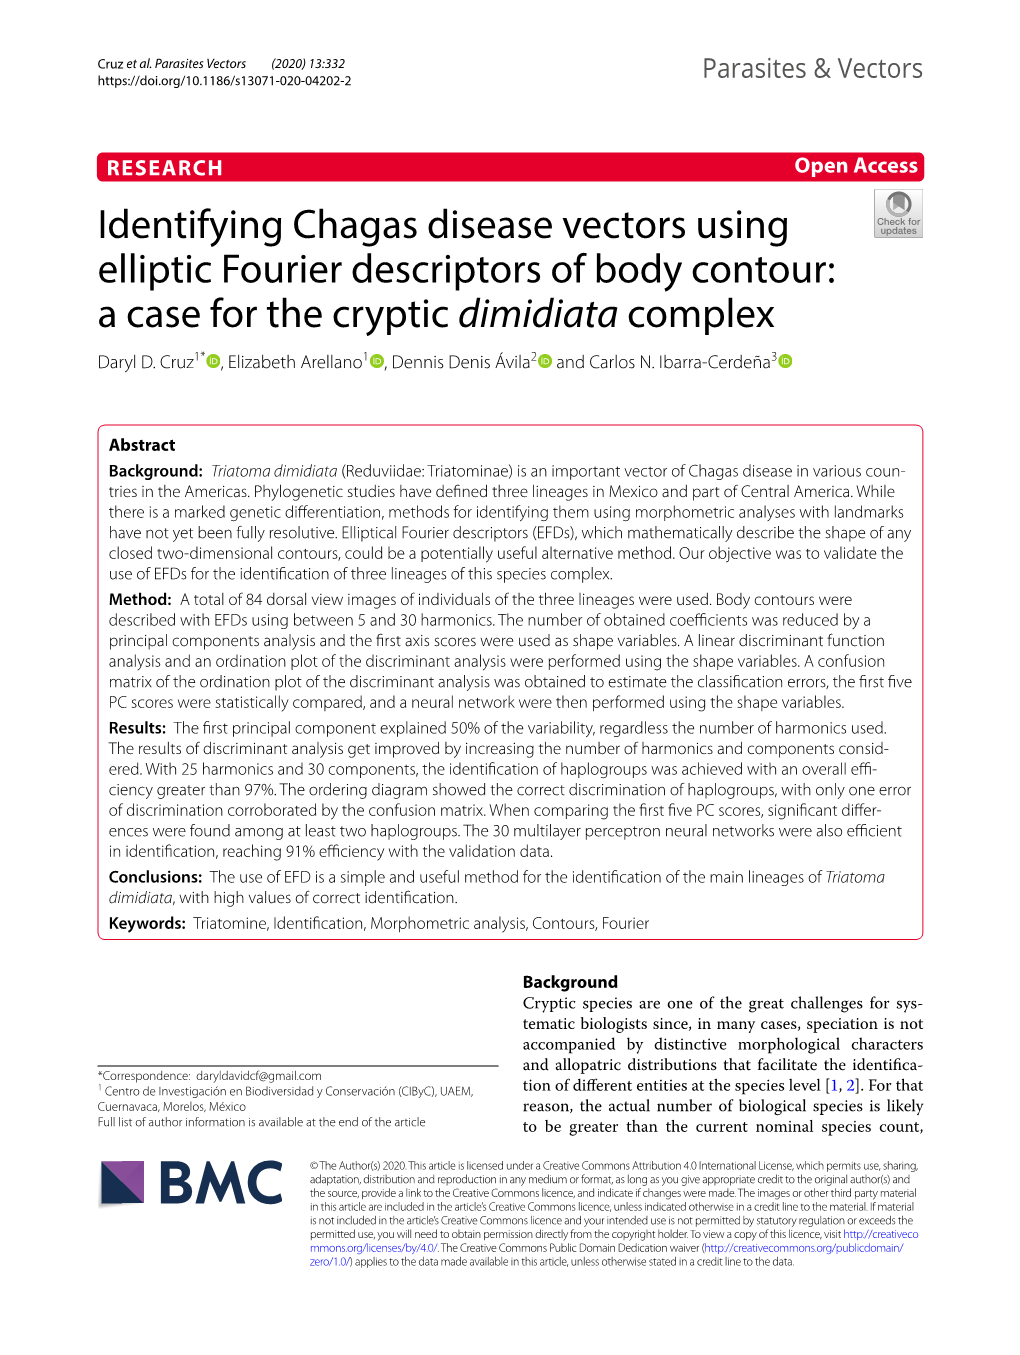 Identifying Chagas Disease Vectors Using Elliptic Fourier Descriptors of Body Contour: a Case for the Cryptic Dimidiata Complex Daryl D